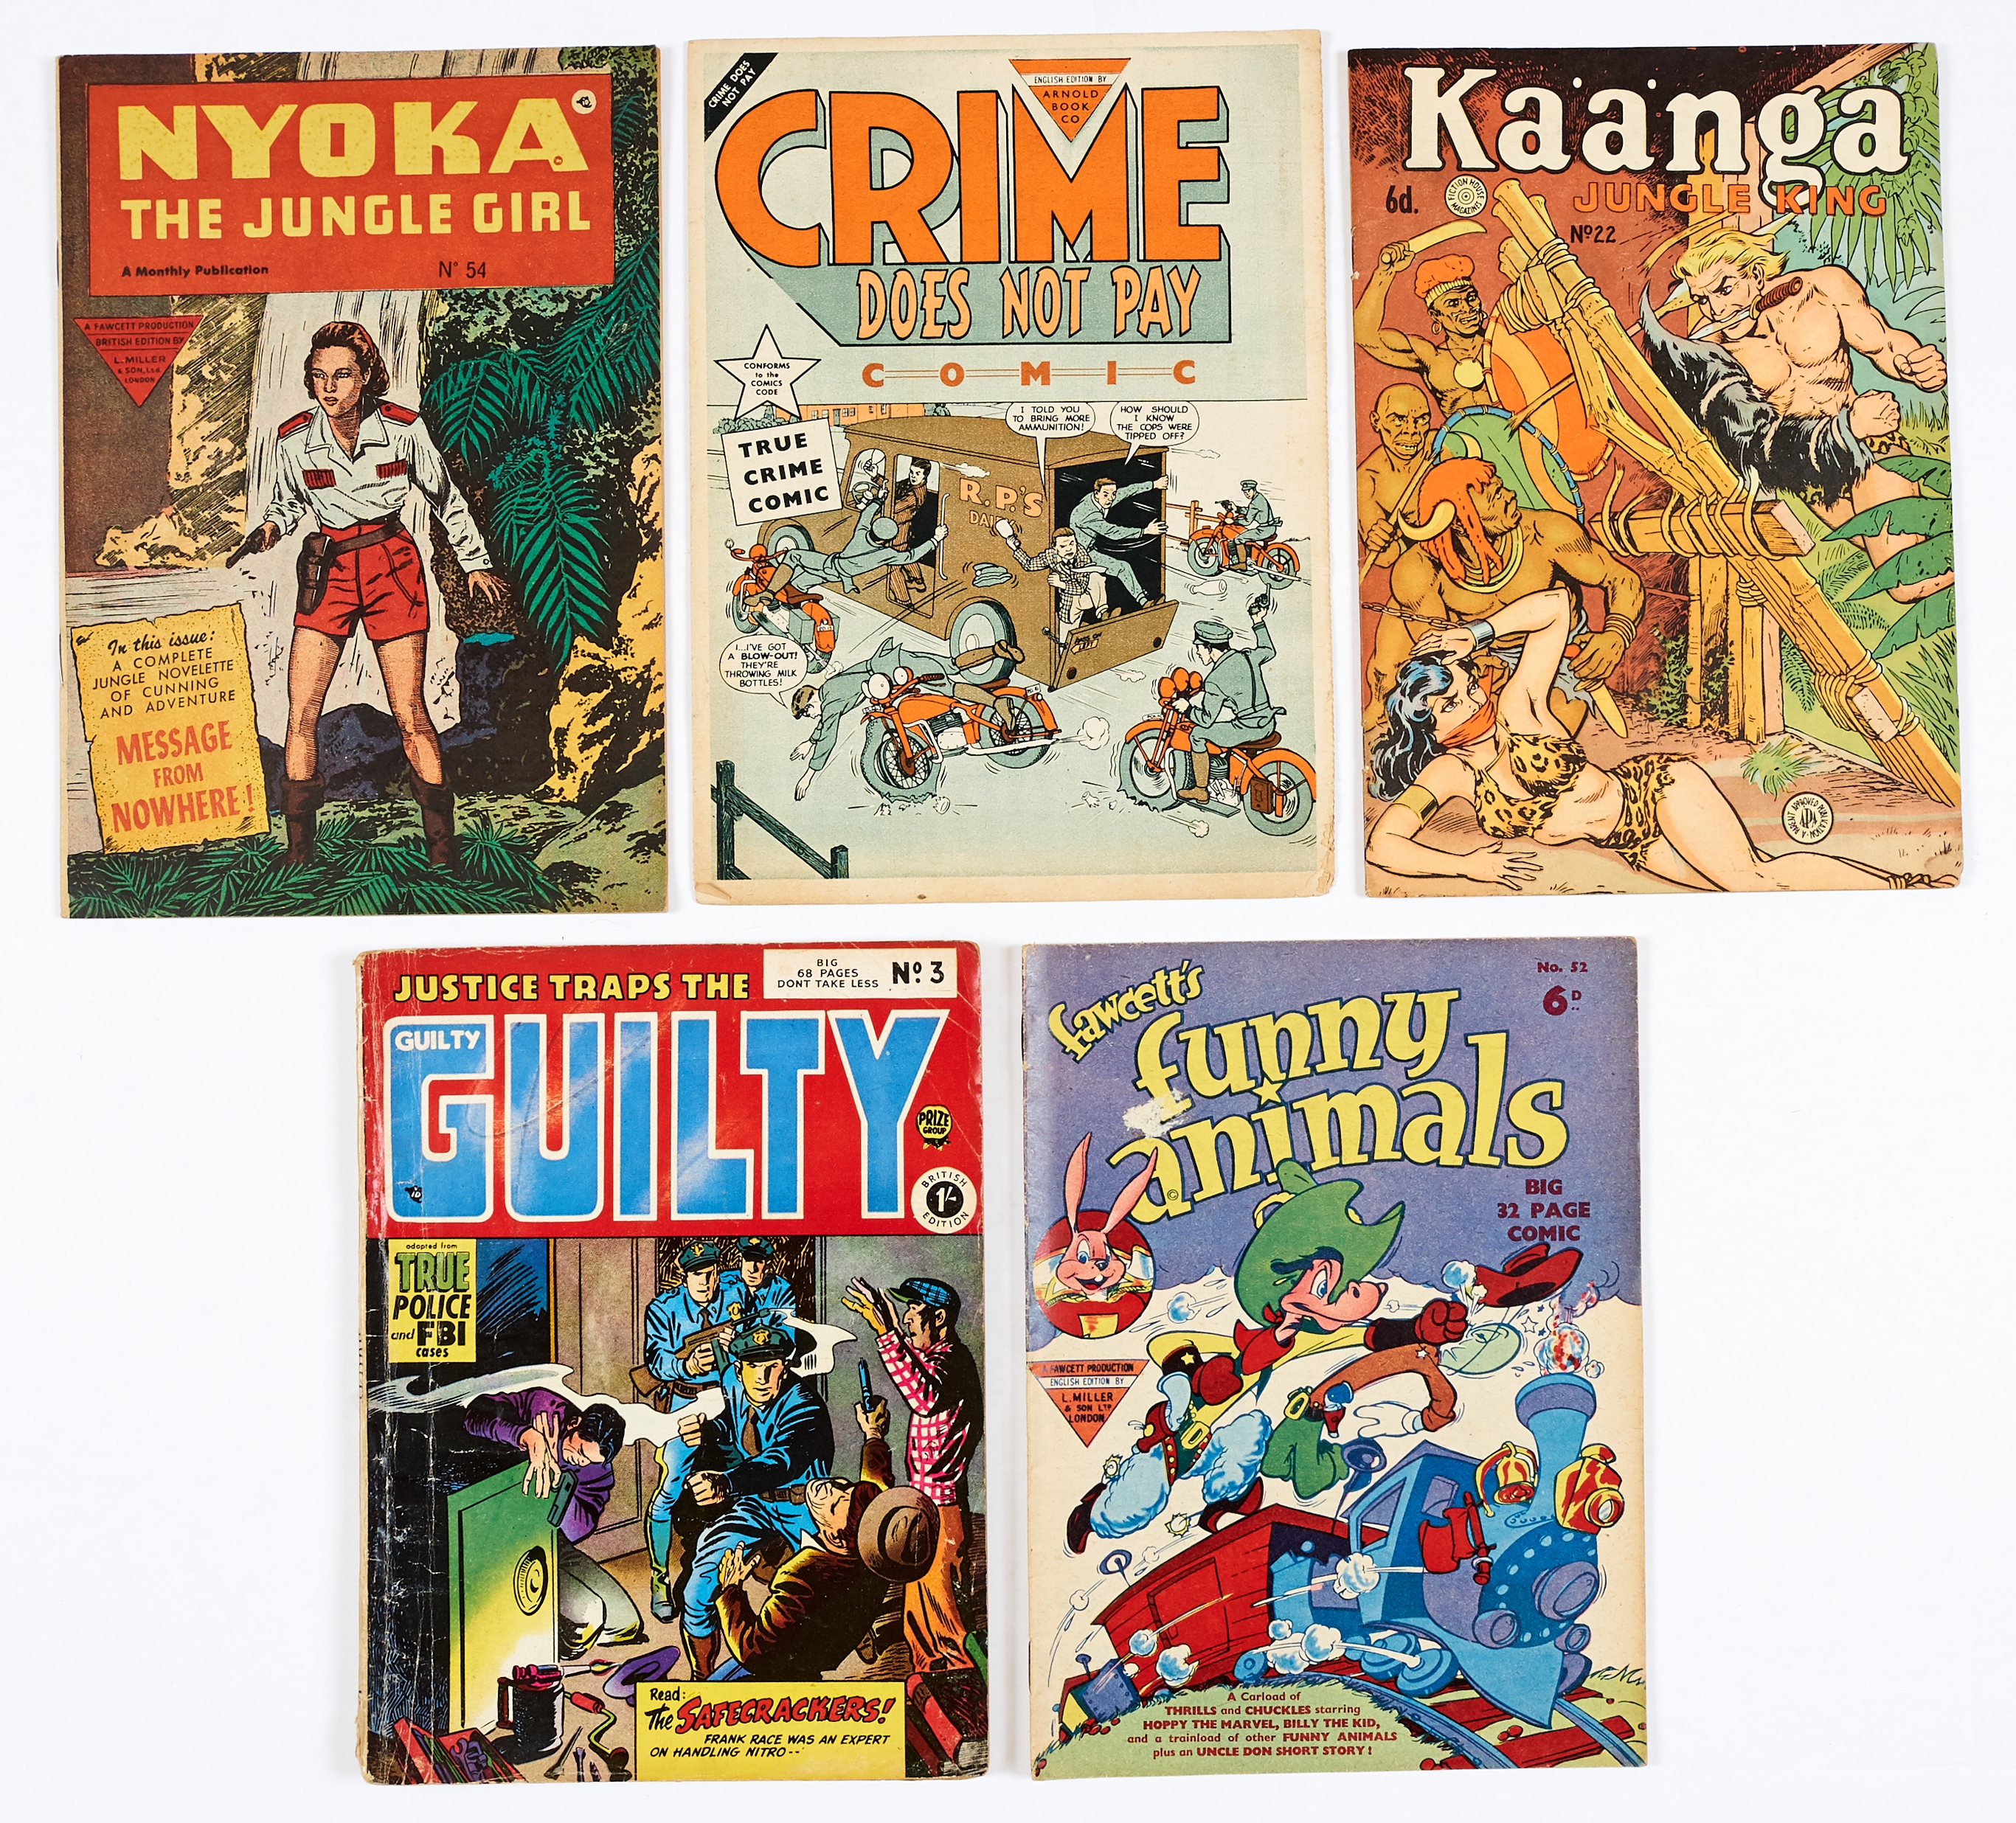 1950s UK reprints +. Crime Does Not Pay n.n. (Arnold Book Co), Justice Traps the Guilty 3 [gd+] (